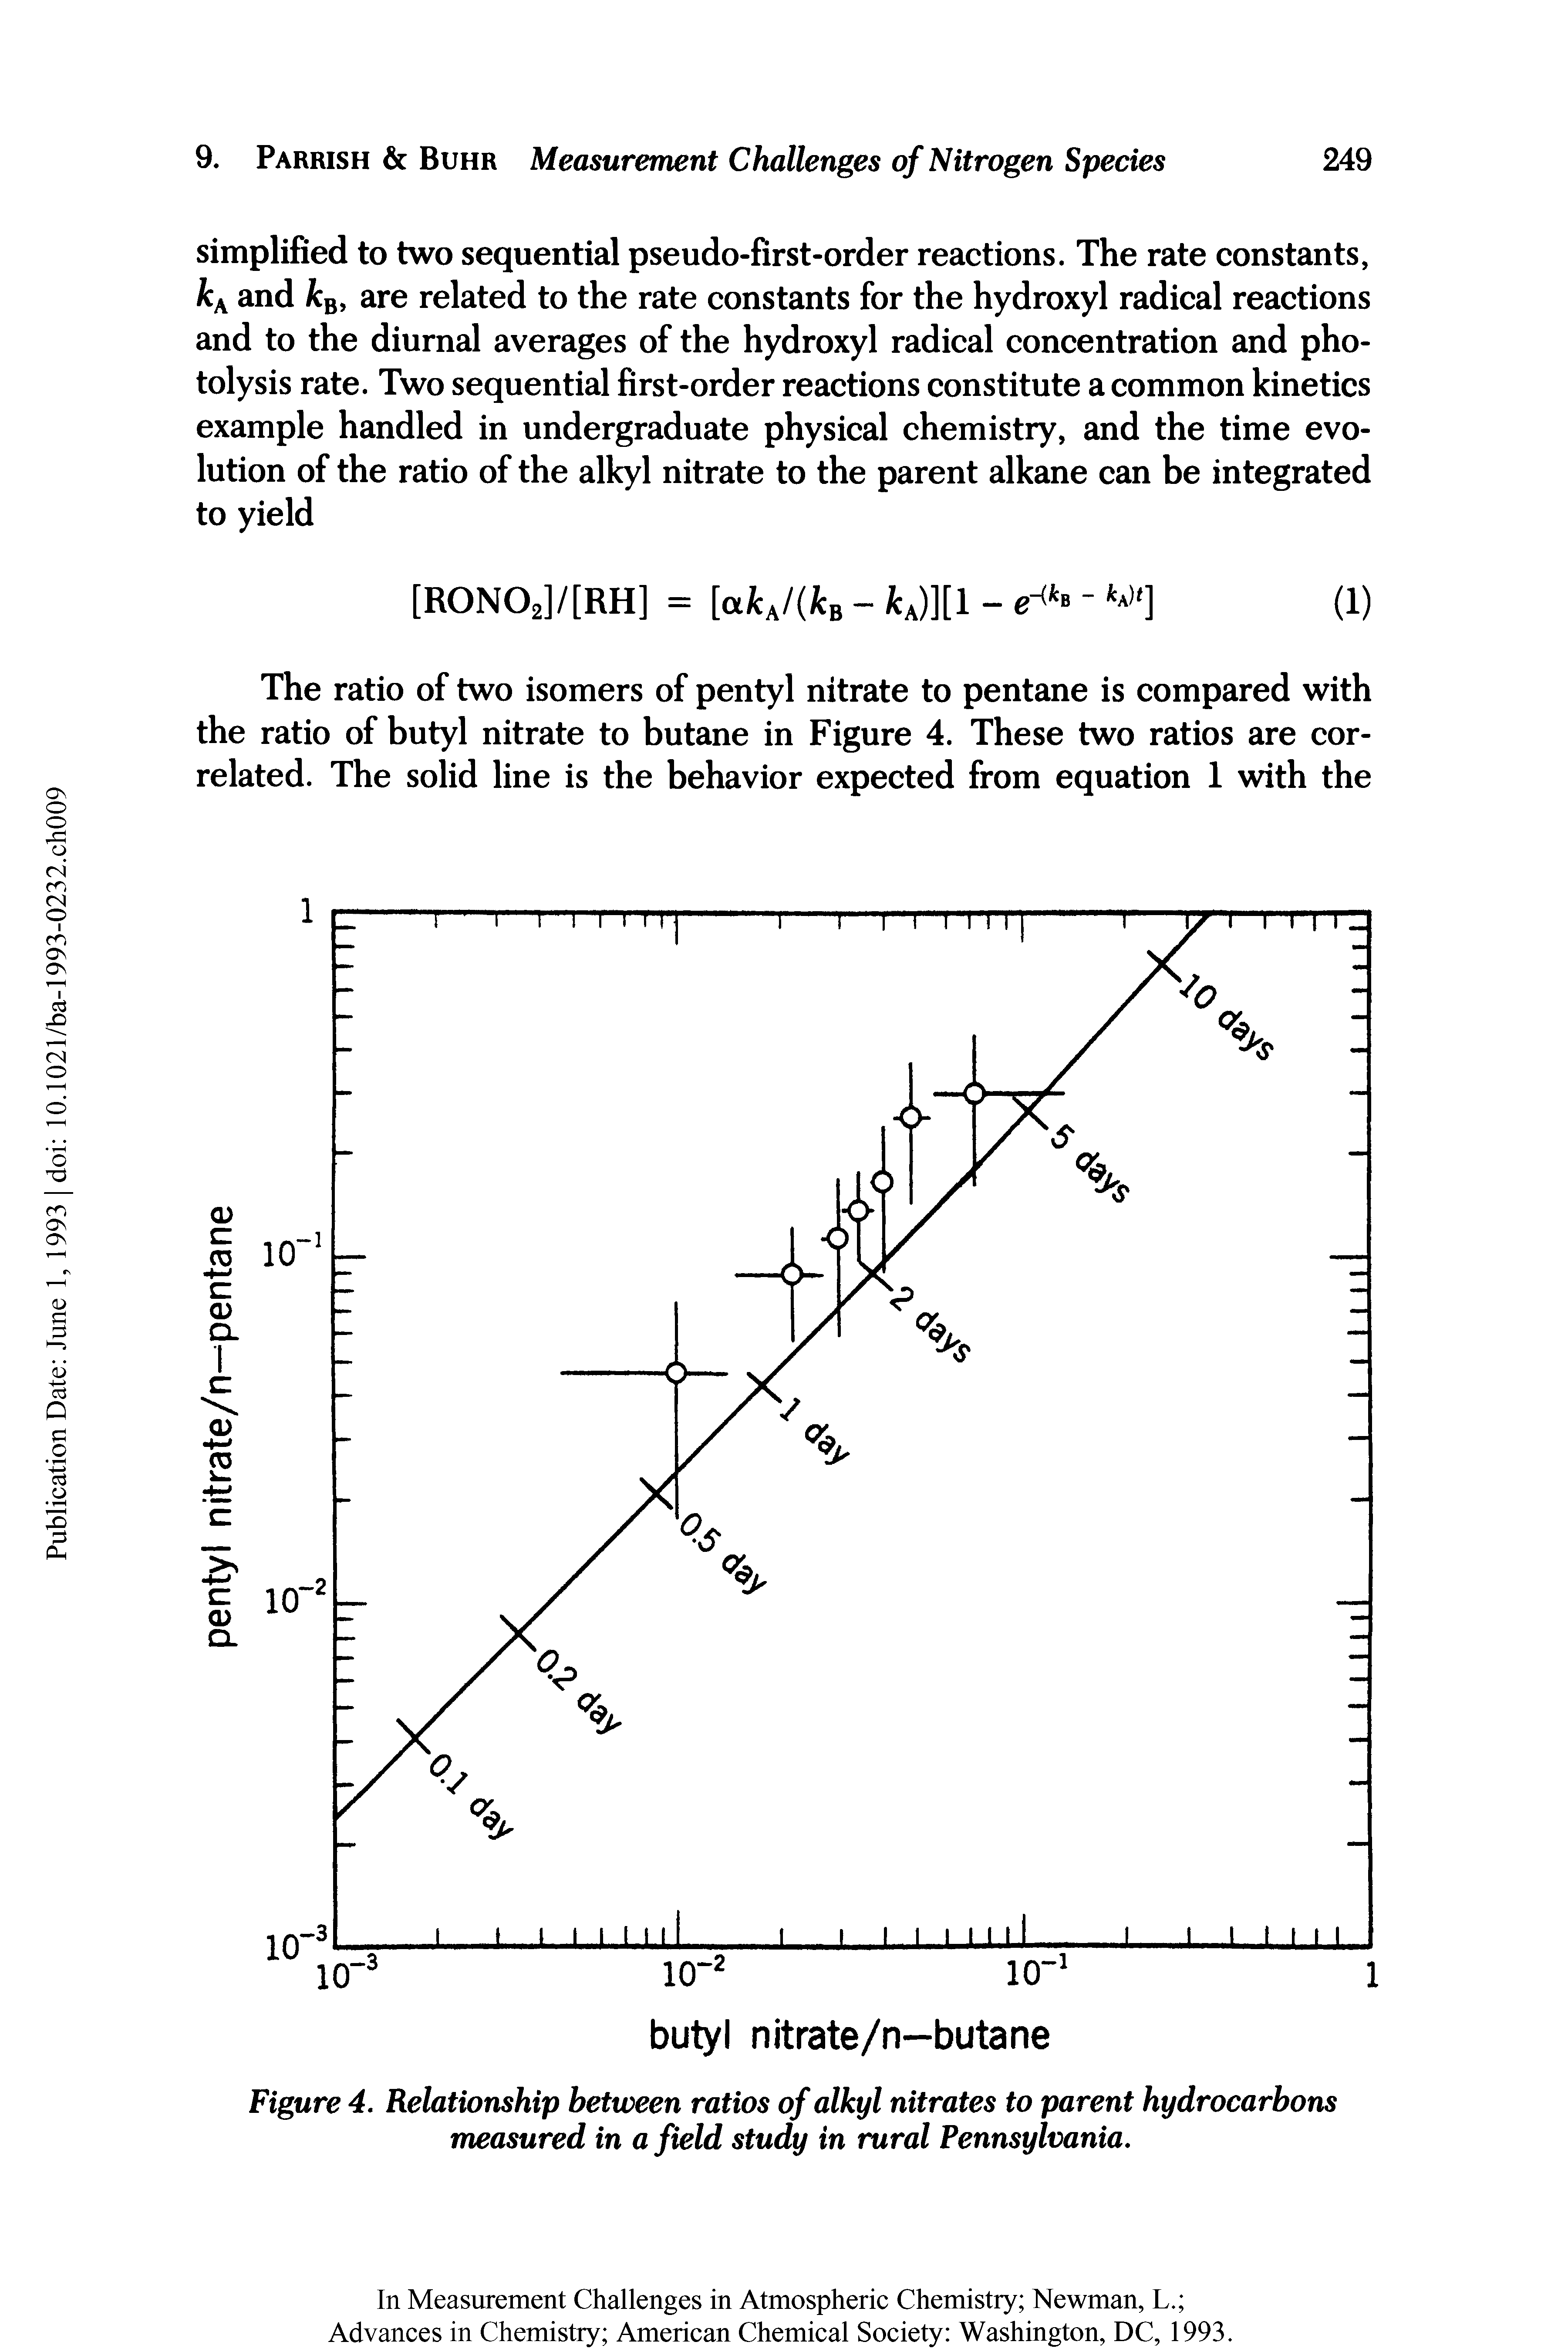 Figure 4. Relationship between ratios of alkyl nitrates to parent hydrocarbons measured in a field study in rural Pennsylvania.